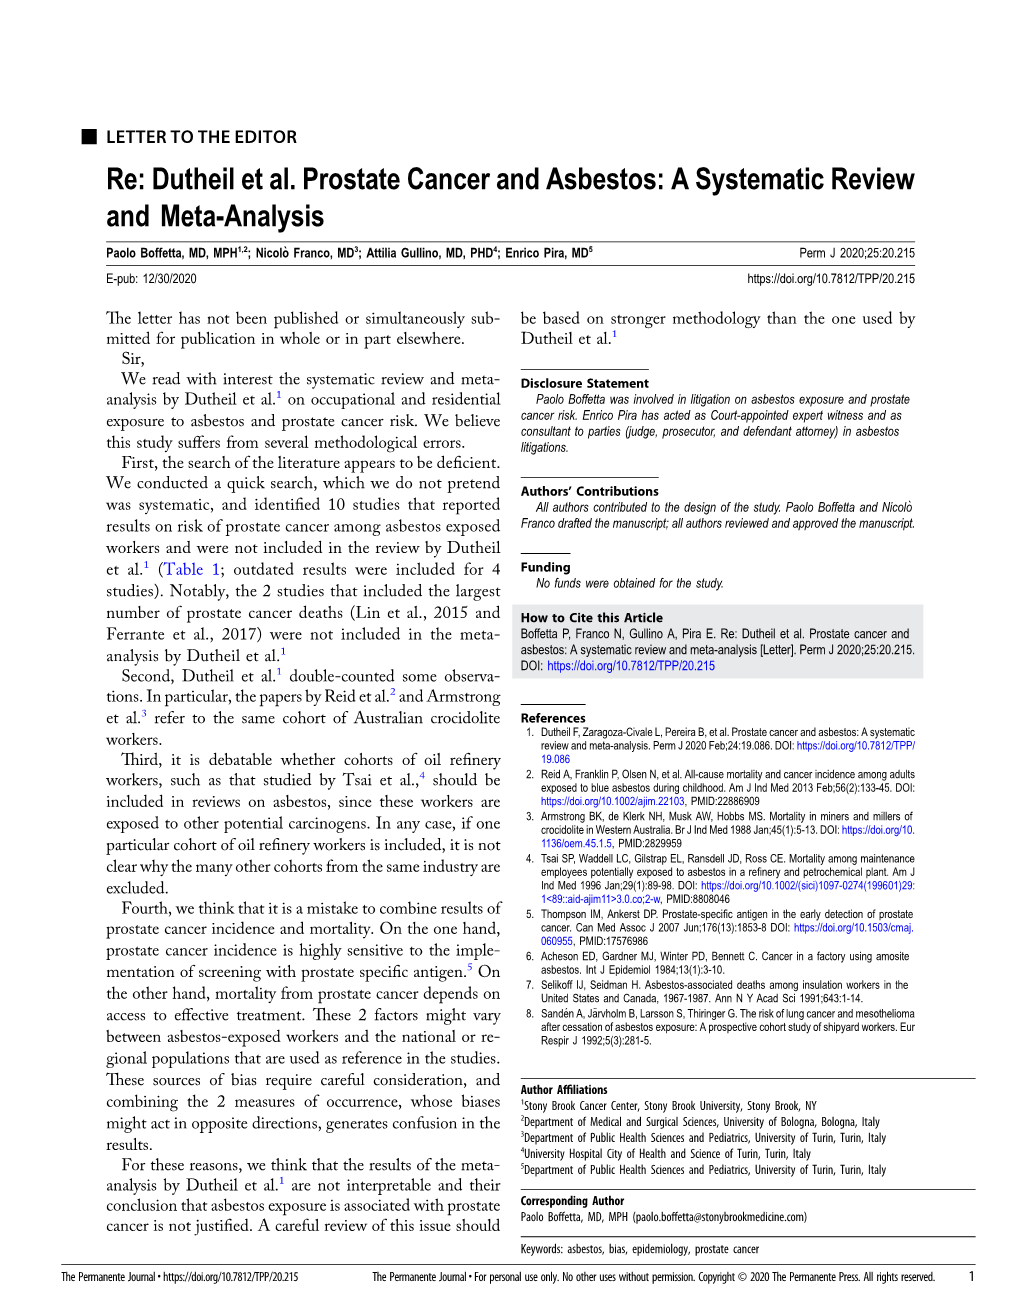 Dutheil Et Al. Prostate Cancer and Asbestos: a Systematic Review and Meta-Analysis